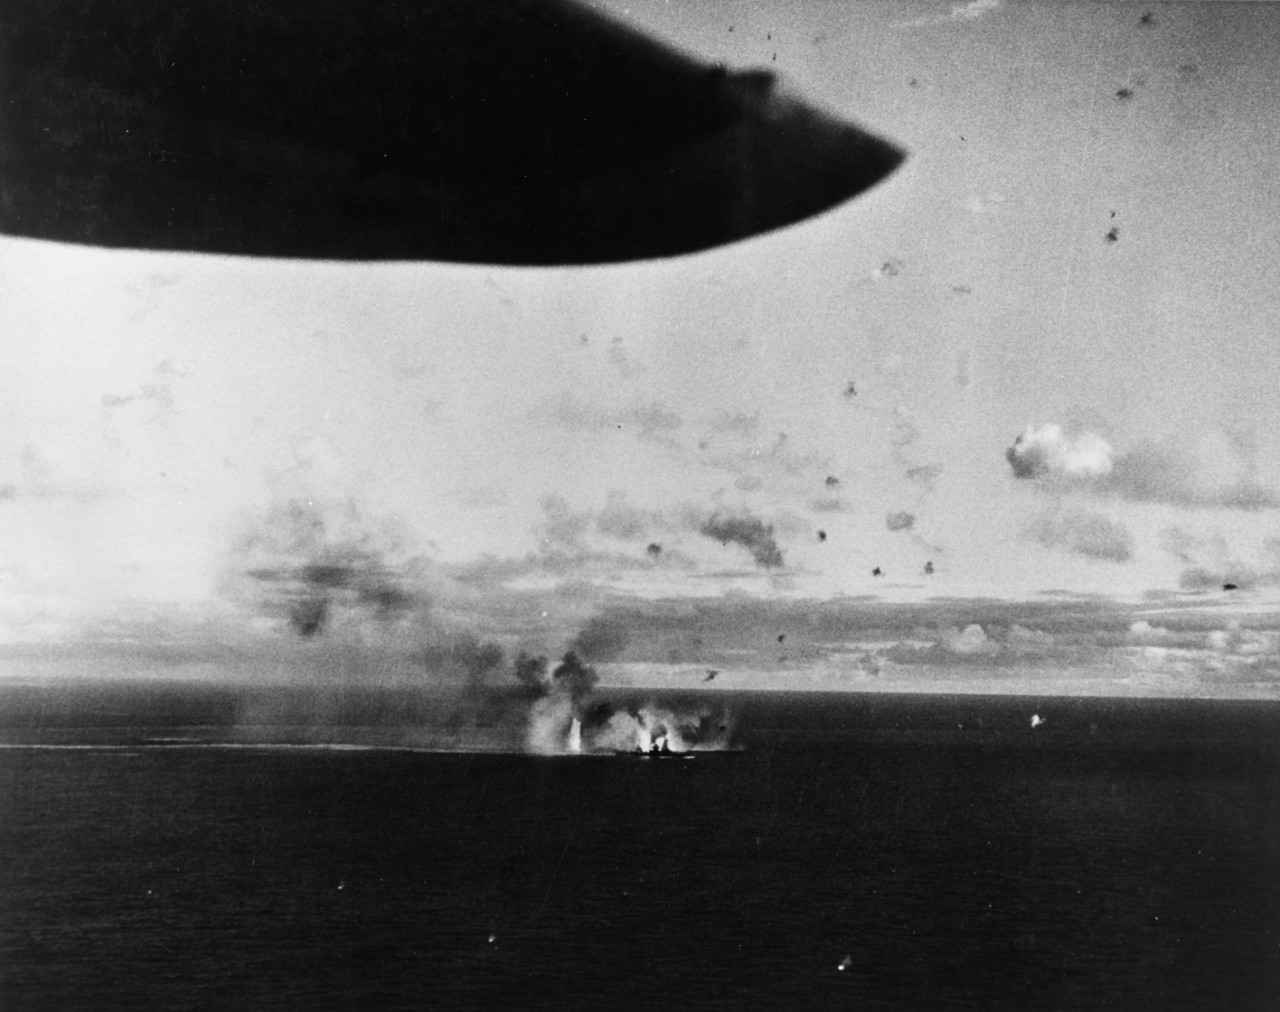 Air attack on Japanese battleship Ise or Hyuga, seen from a U.S. carrier aircraft.